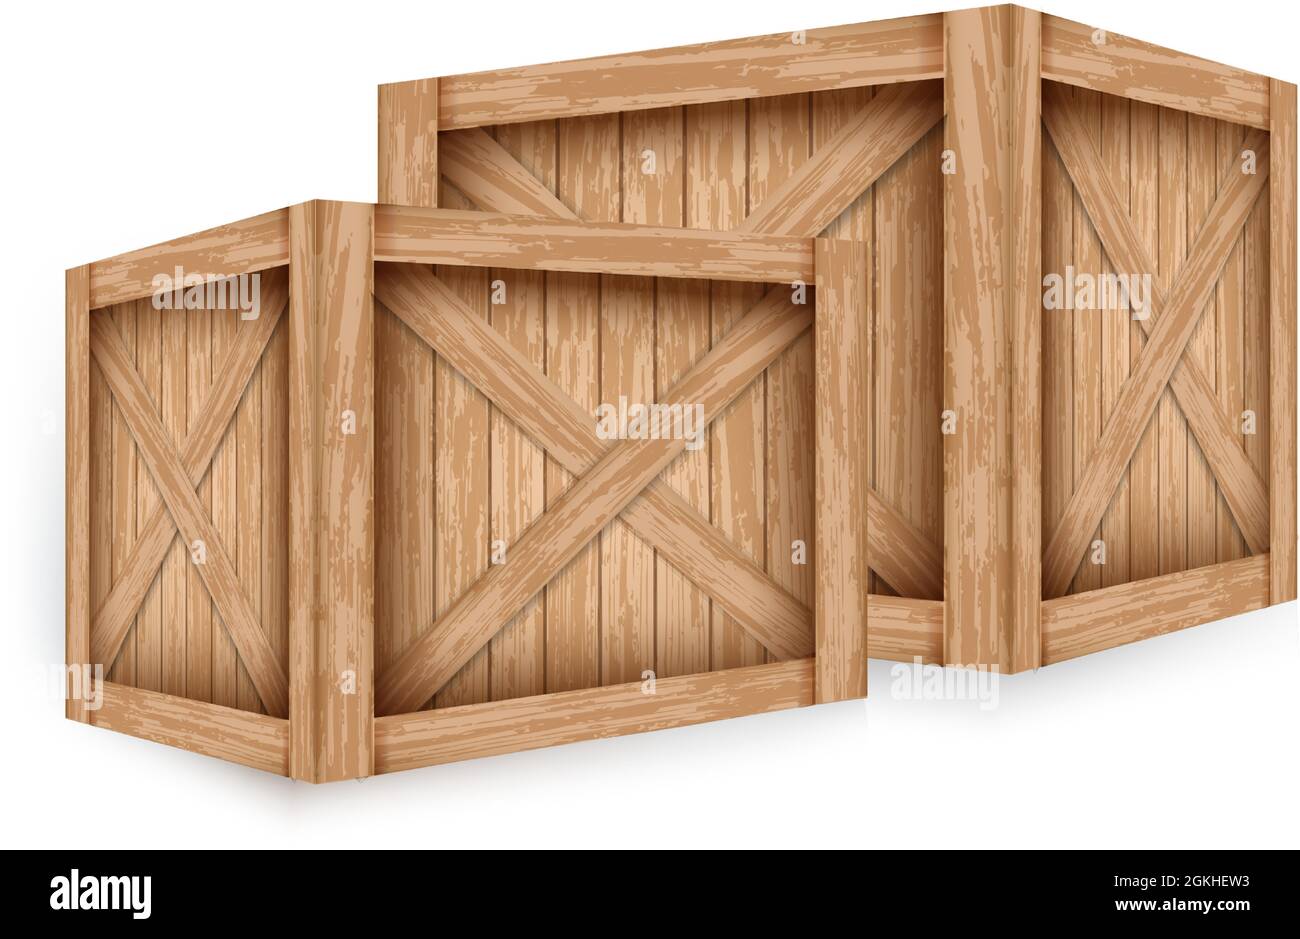 Realistic different cargo boxes. Vintage wooden crates made of planks for storage and delivery design. Wooden containers mockup template. Stock Vector